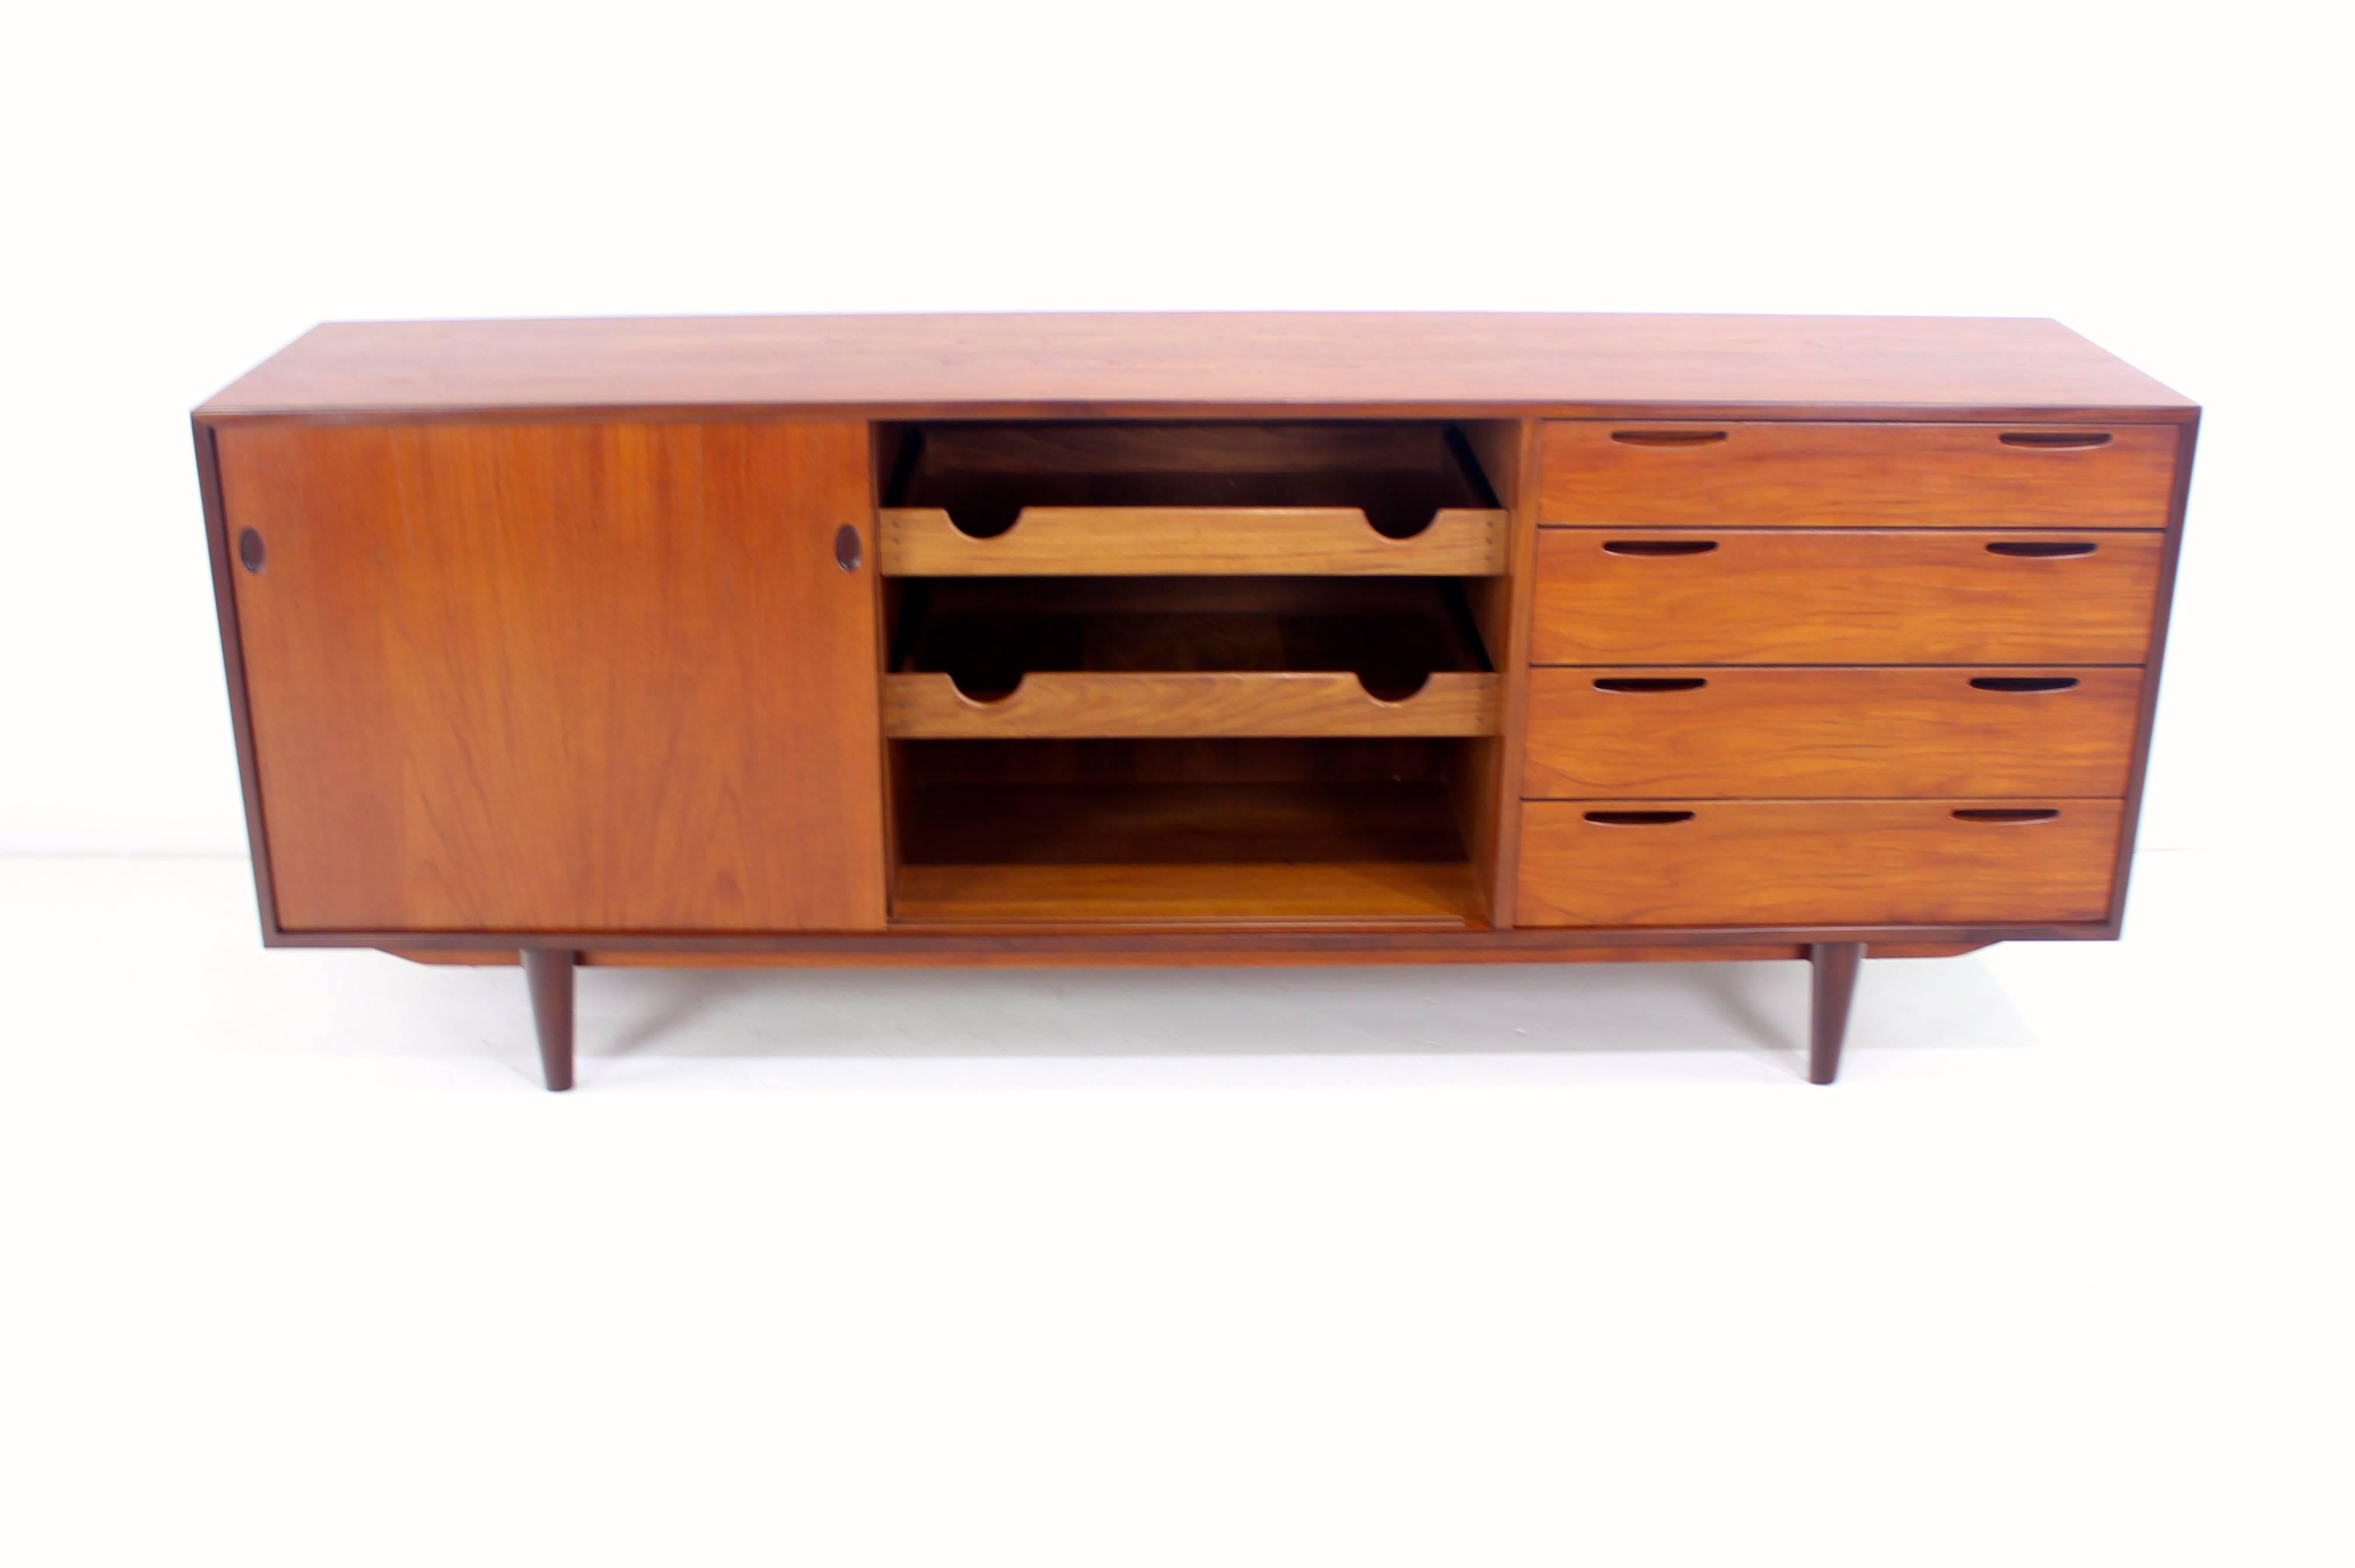 Danish Modern Teak Credenza Designed by Ib Kofod-Larsen In Excellent Condition For Sale In Portland, OR